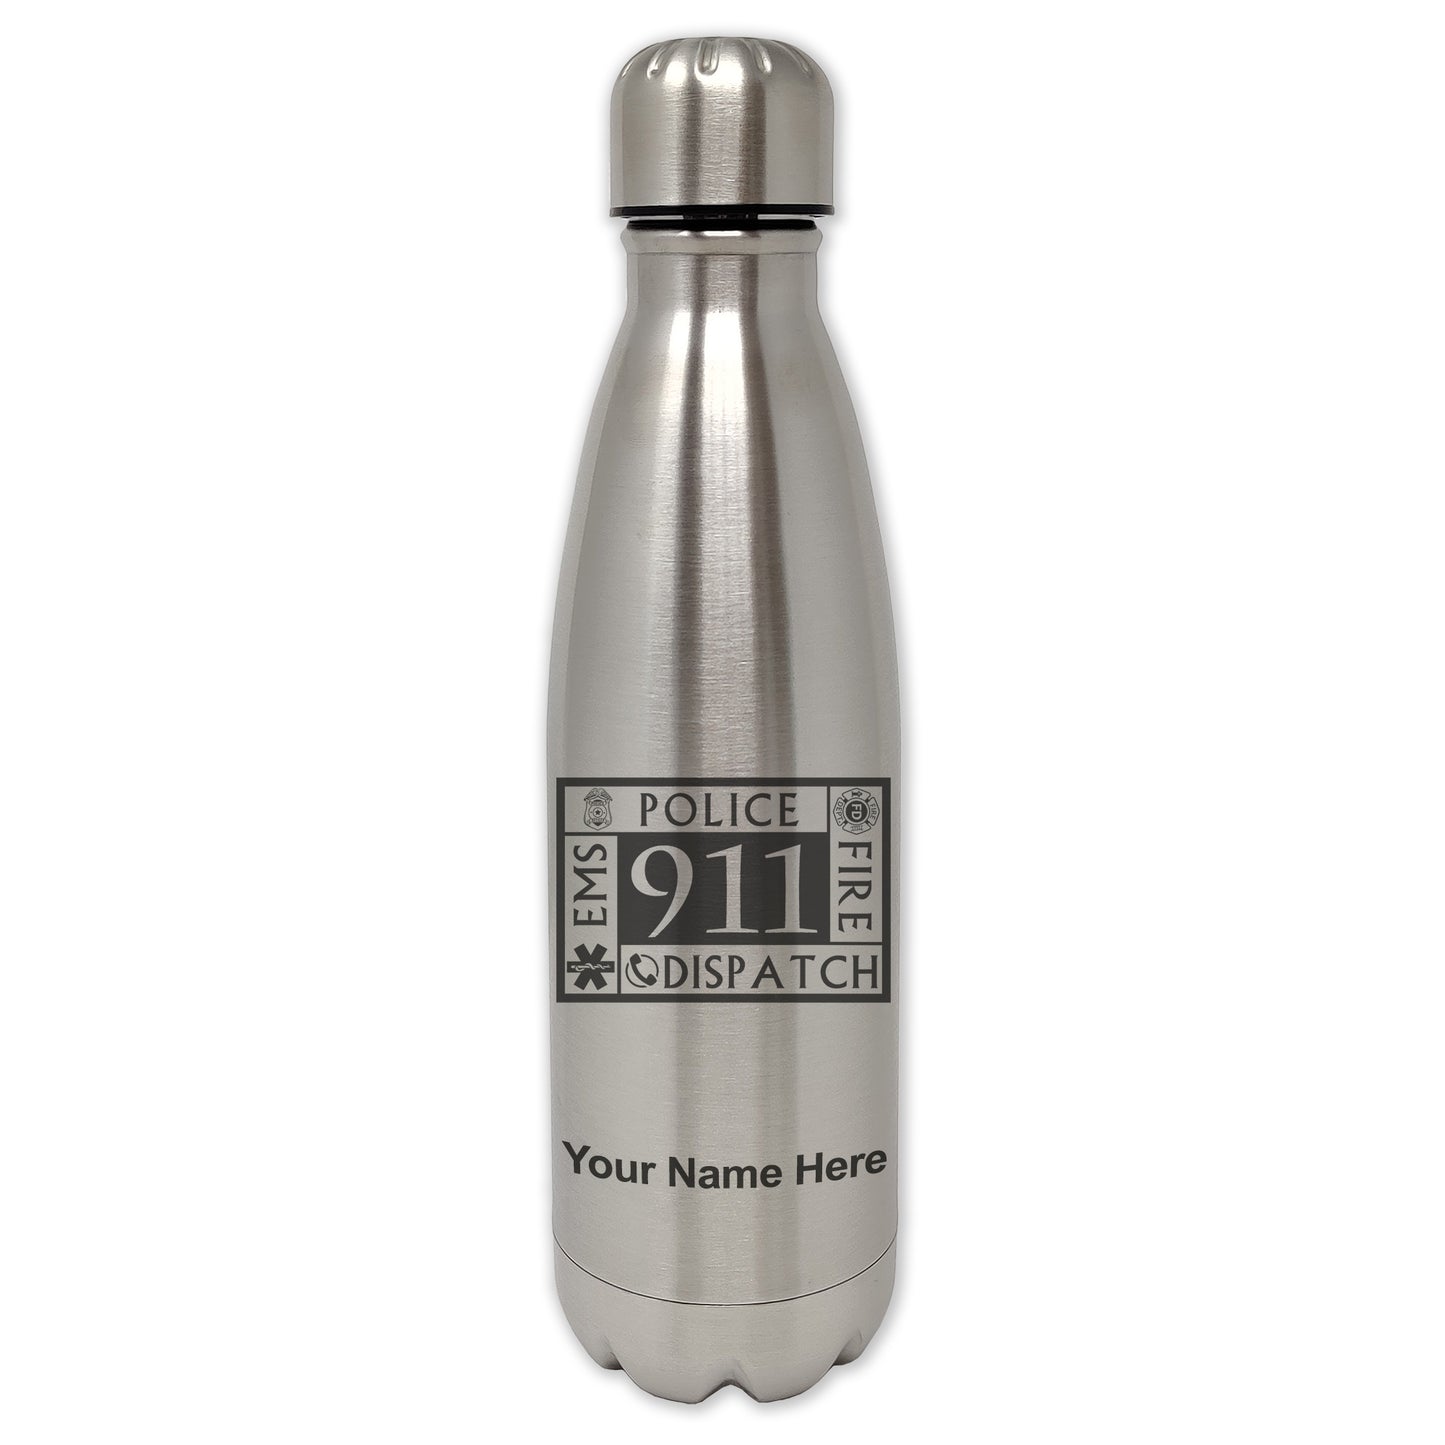 LaserGram Double Wall Water Bottle, Emergency Dispatcher 911, Personalized Engraving Included